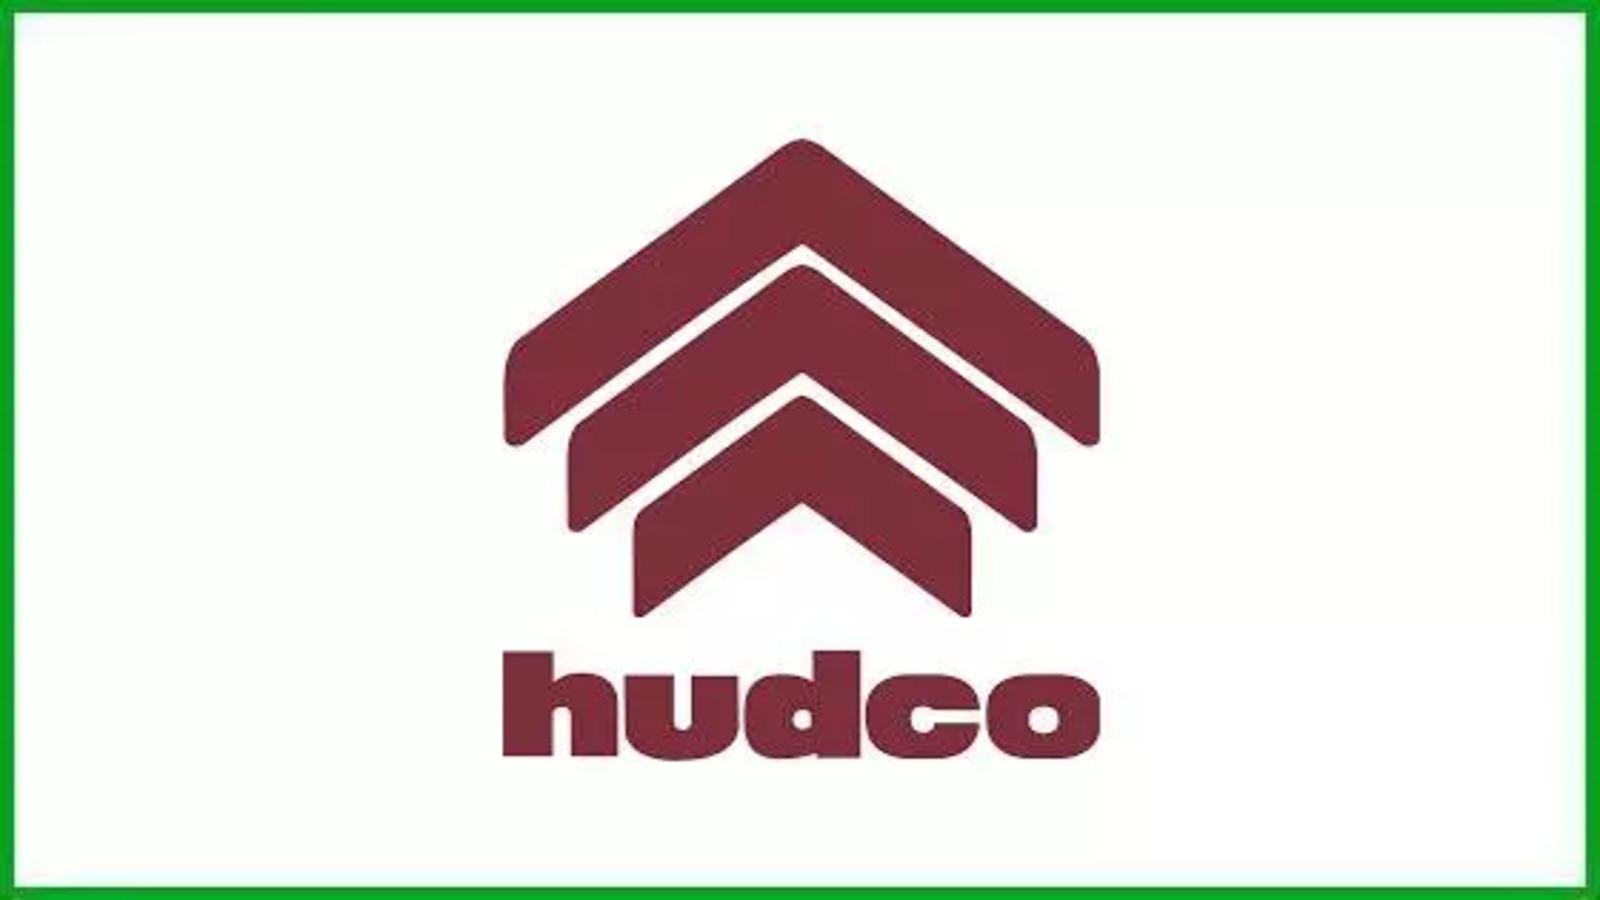 Govt To Sell 7% Equity Stake In Hudco Through OFS